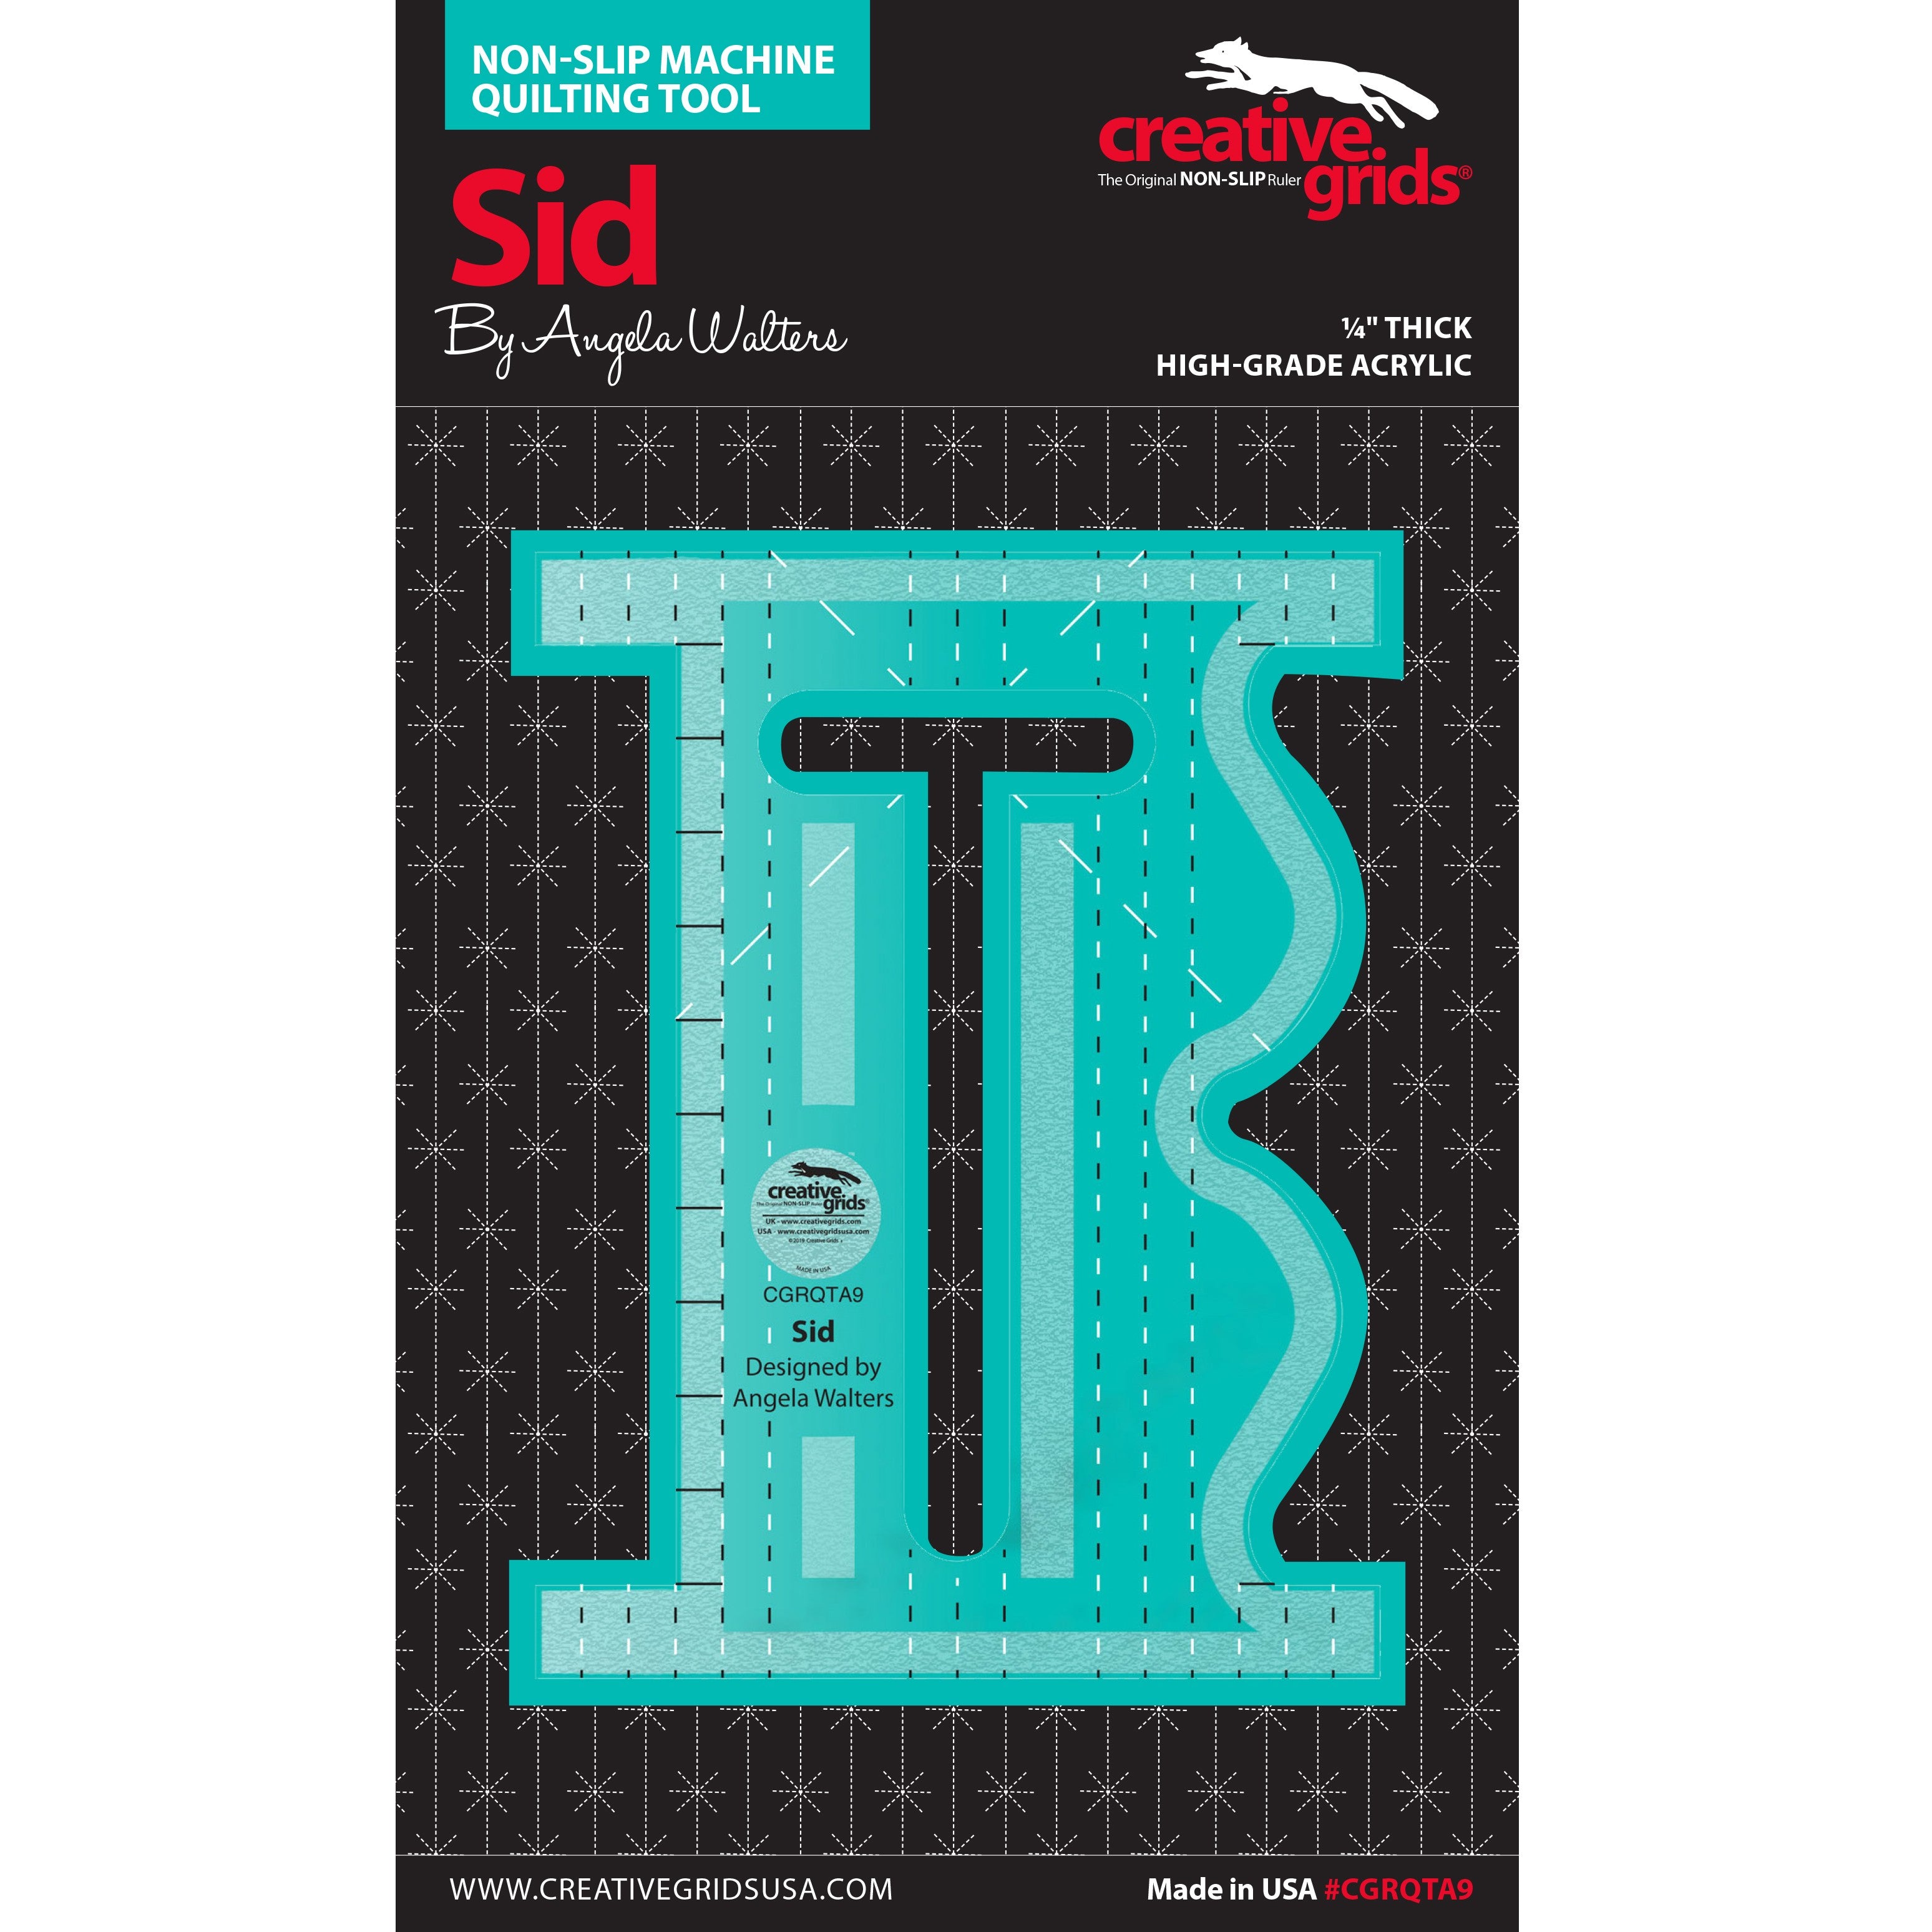 Creative Grids Machine Quilting Tool - SID in packaging front-view